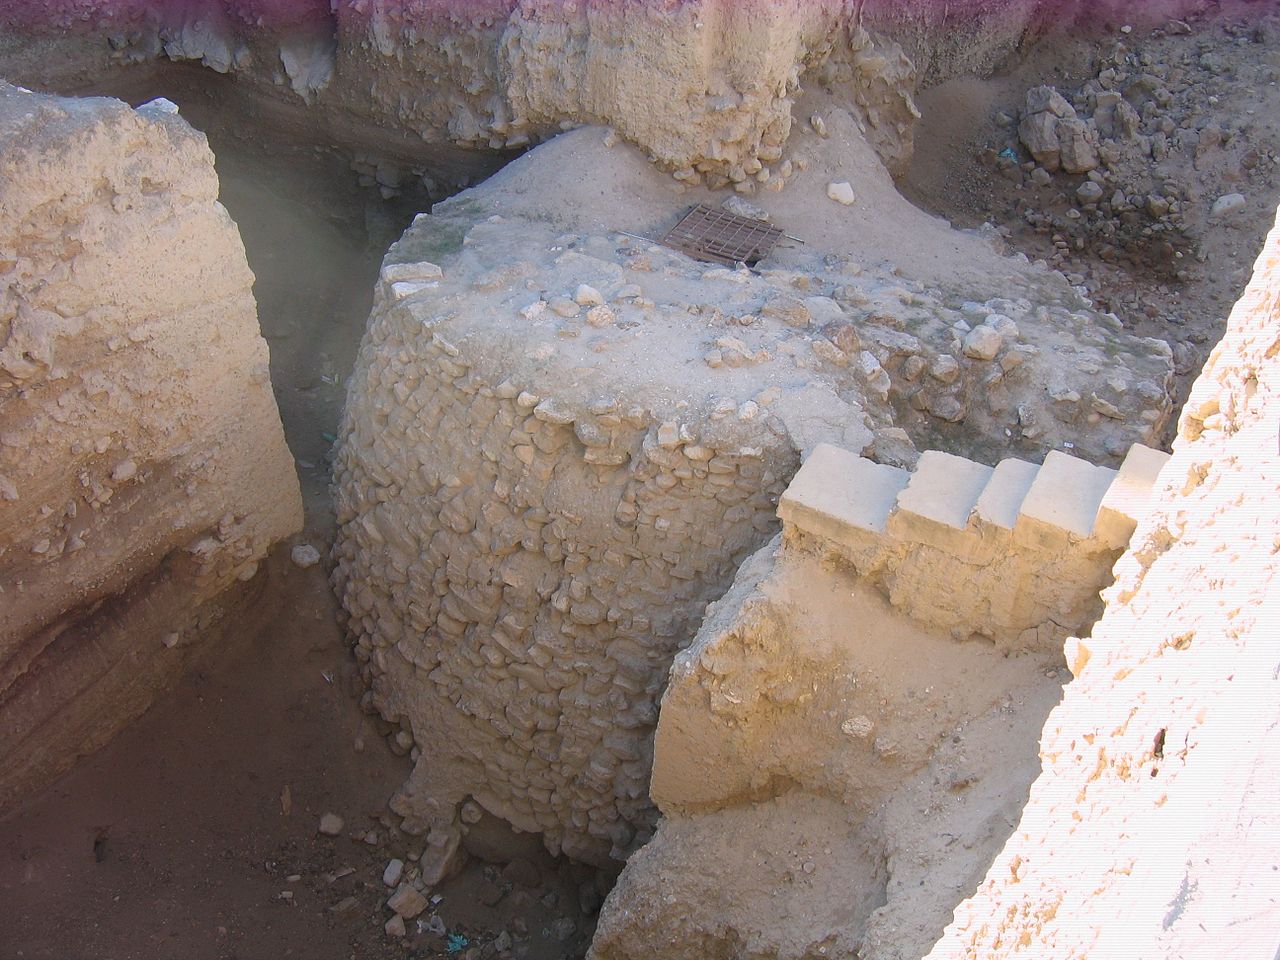 Tower of Jericho, c. 8000 BC